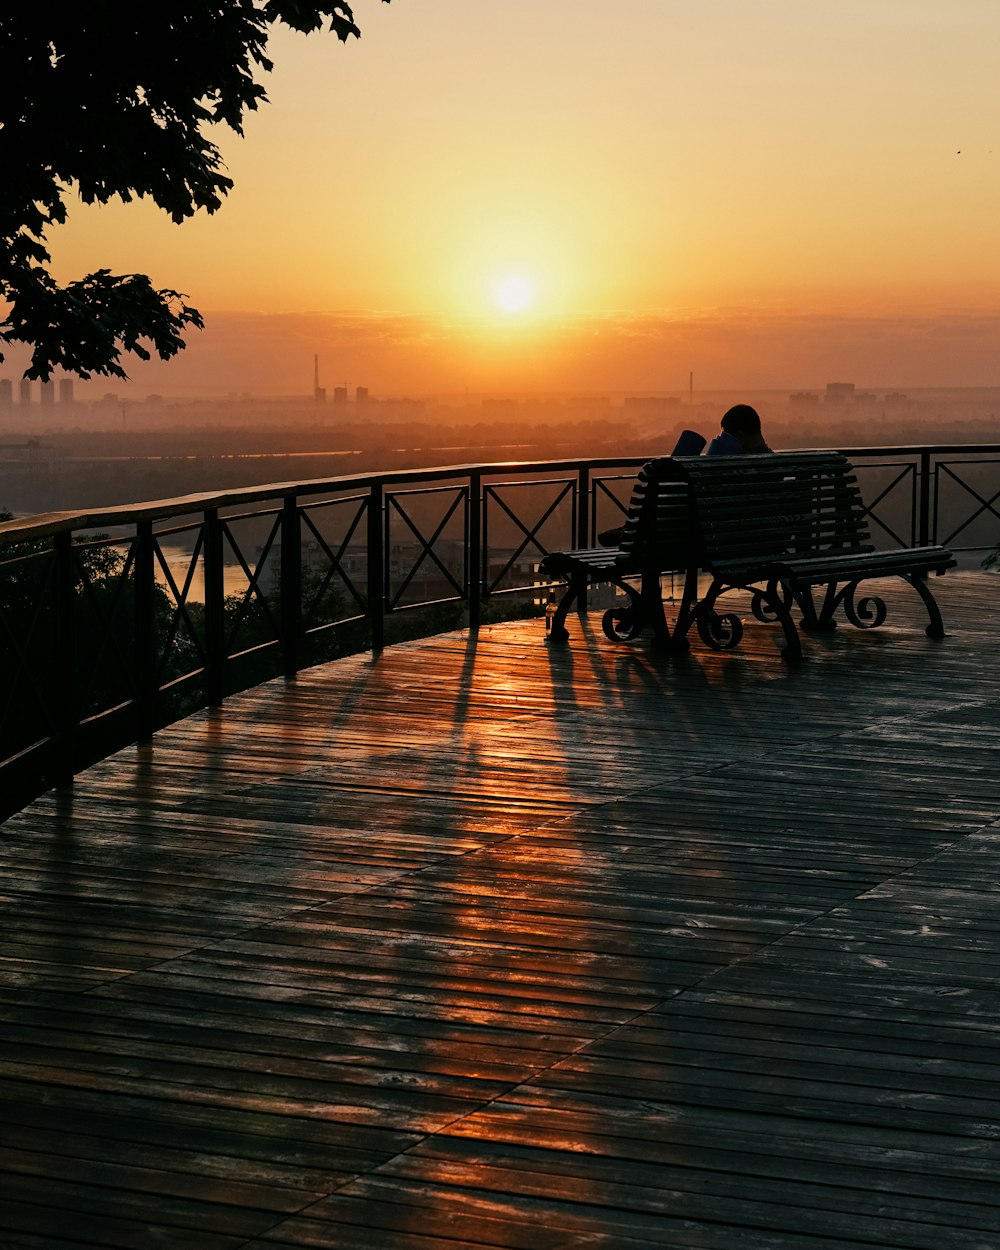 man and woman sitting on bench on dock during sunset